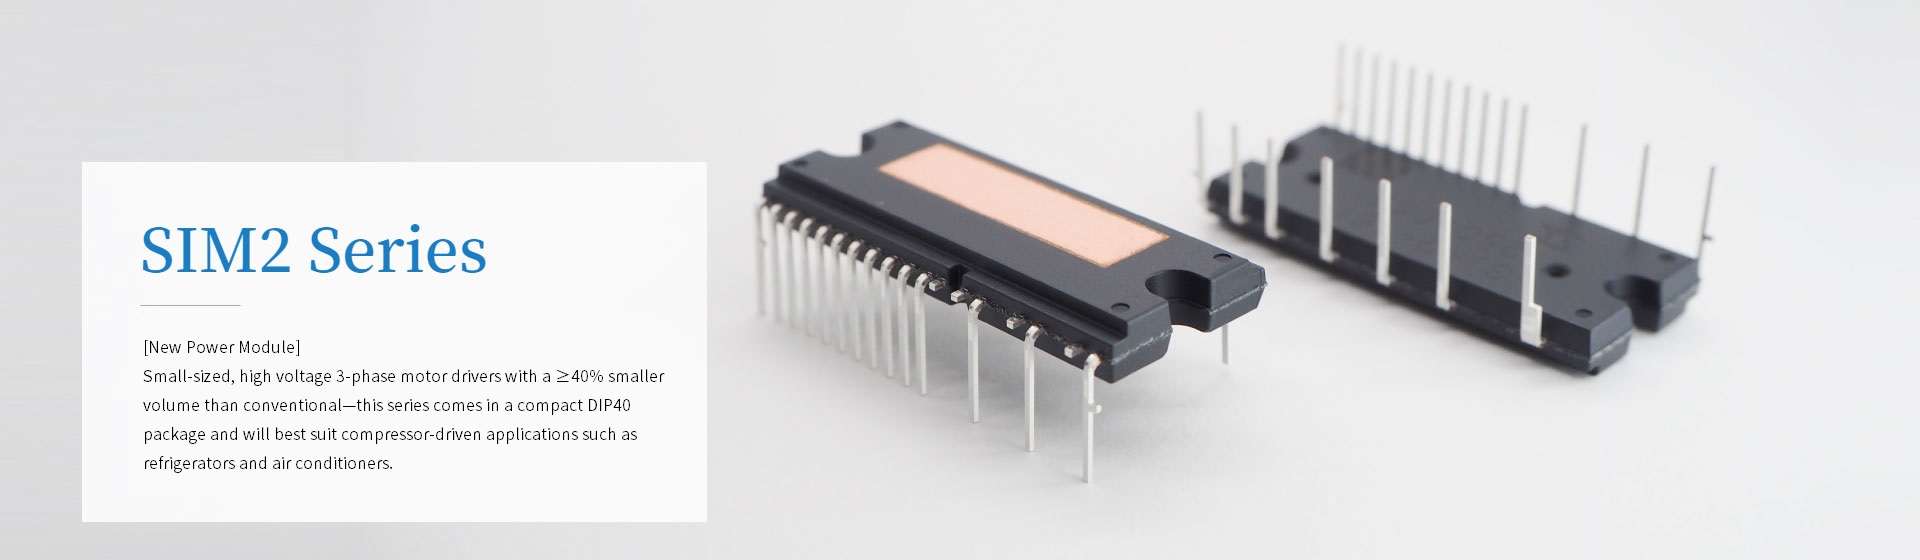 High Voltage 3-phase Motor Driver with a ≥40％ Smaller Volume than Conventional [SIM2-151A]